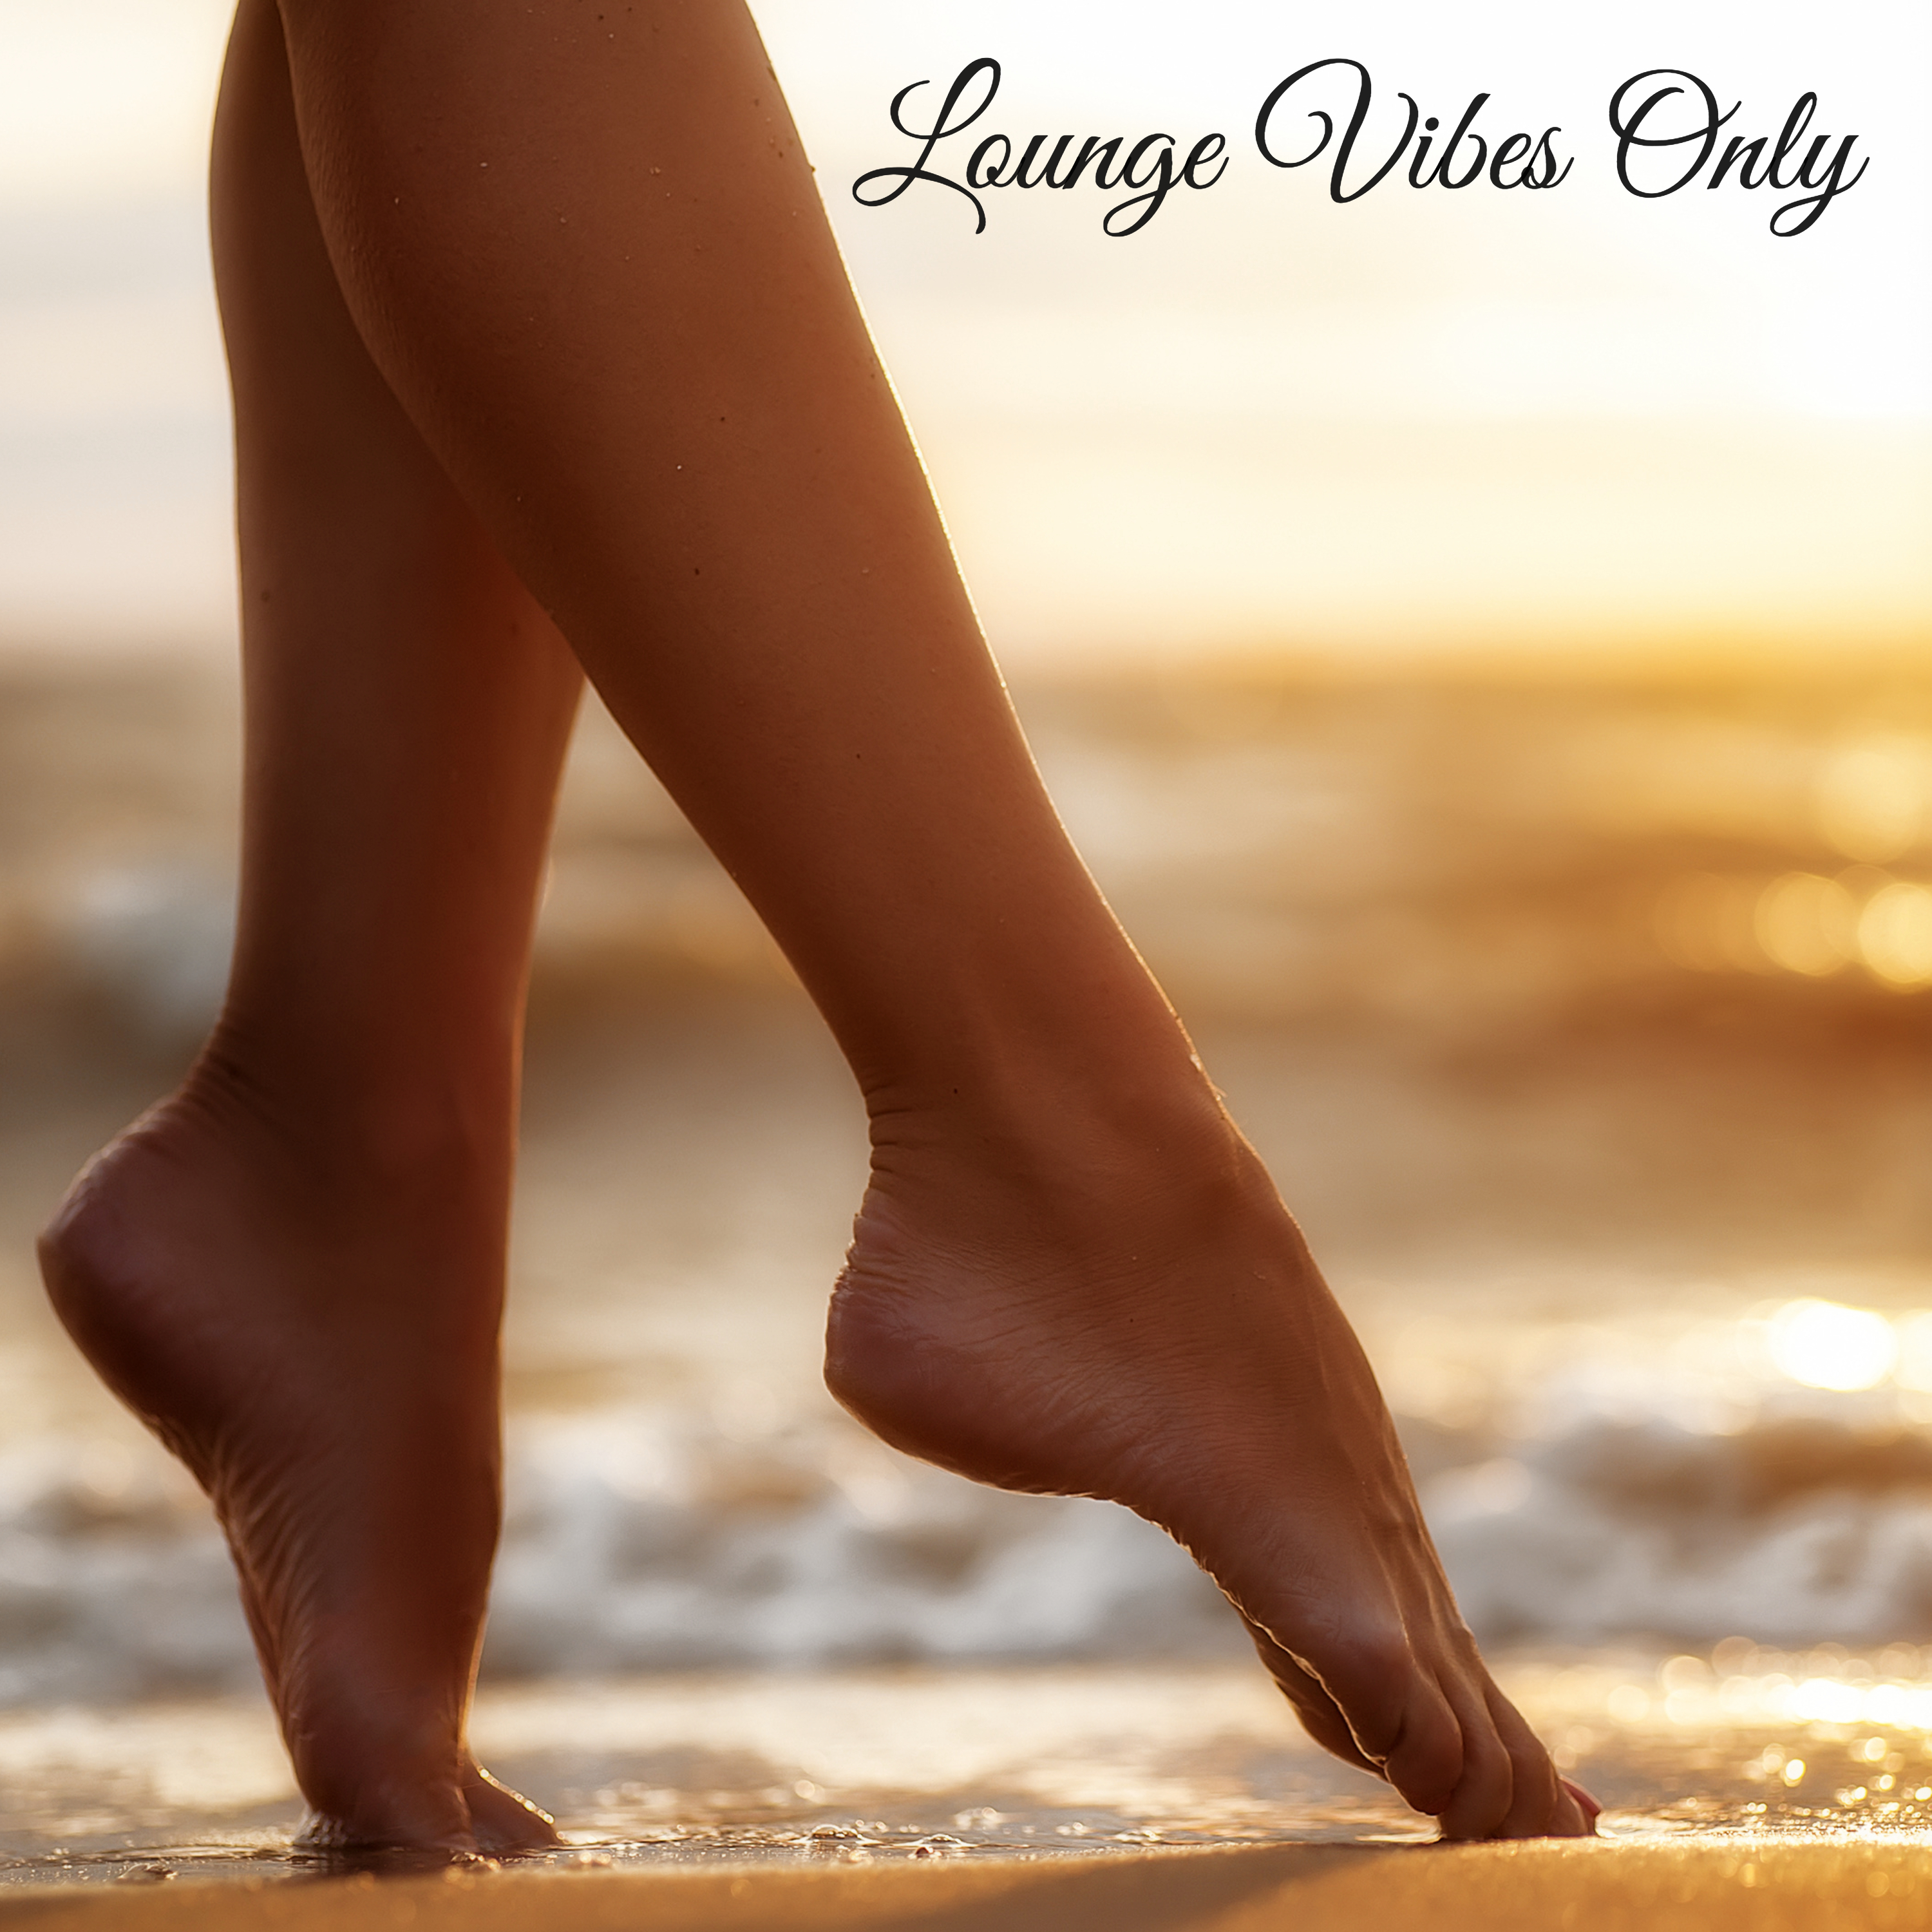 Lounge Vibes Only – Best Lounge Music for a Perfect Day, Your Favorite Morning Wake Up Music Playlist